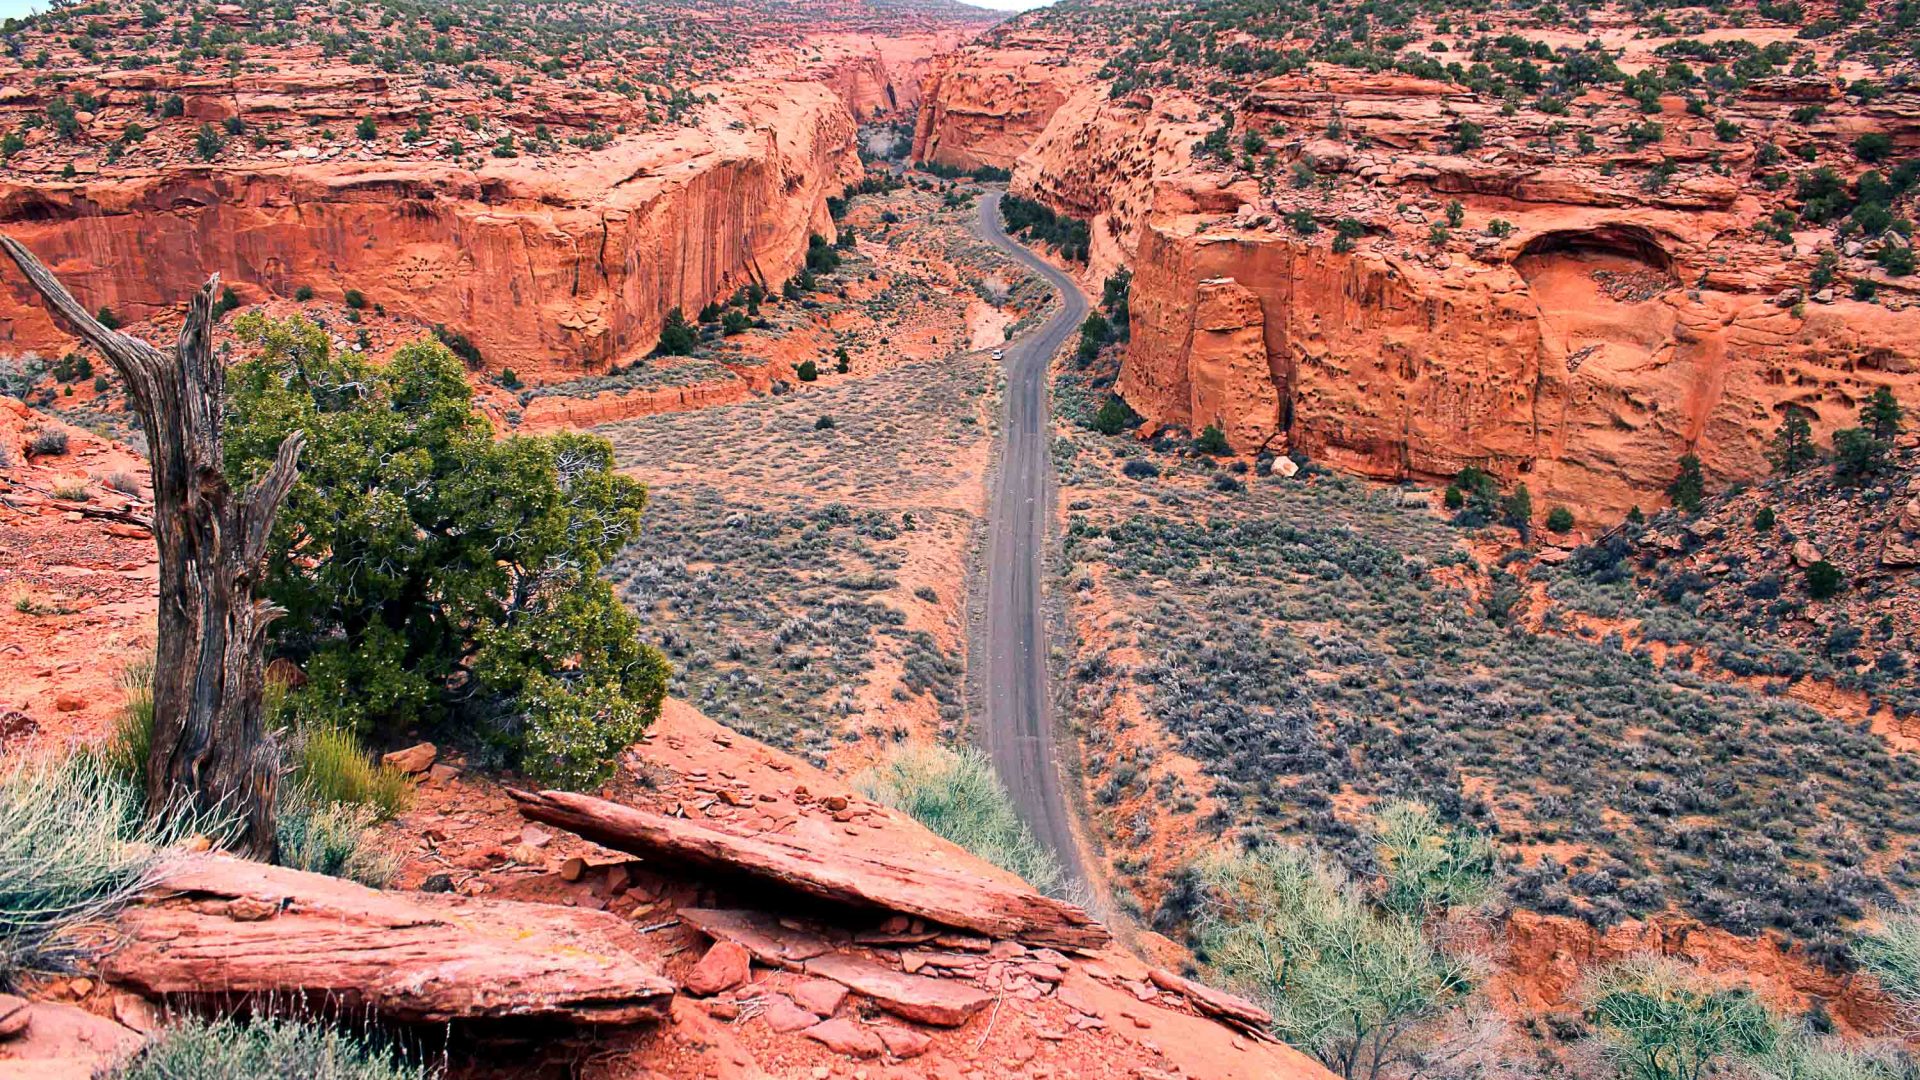 A road goes straight through the middle of tall red rock formations.